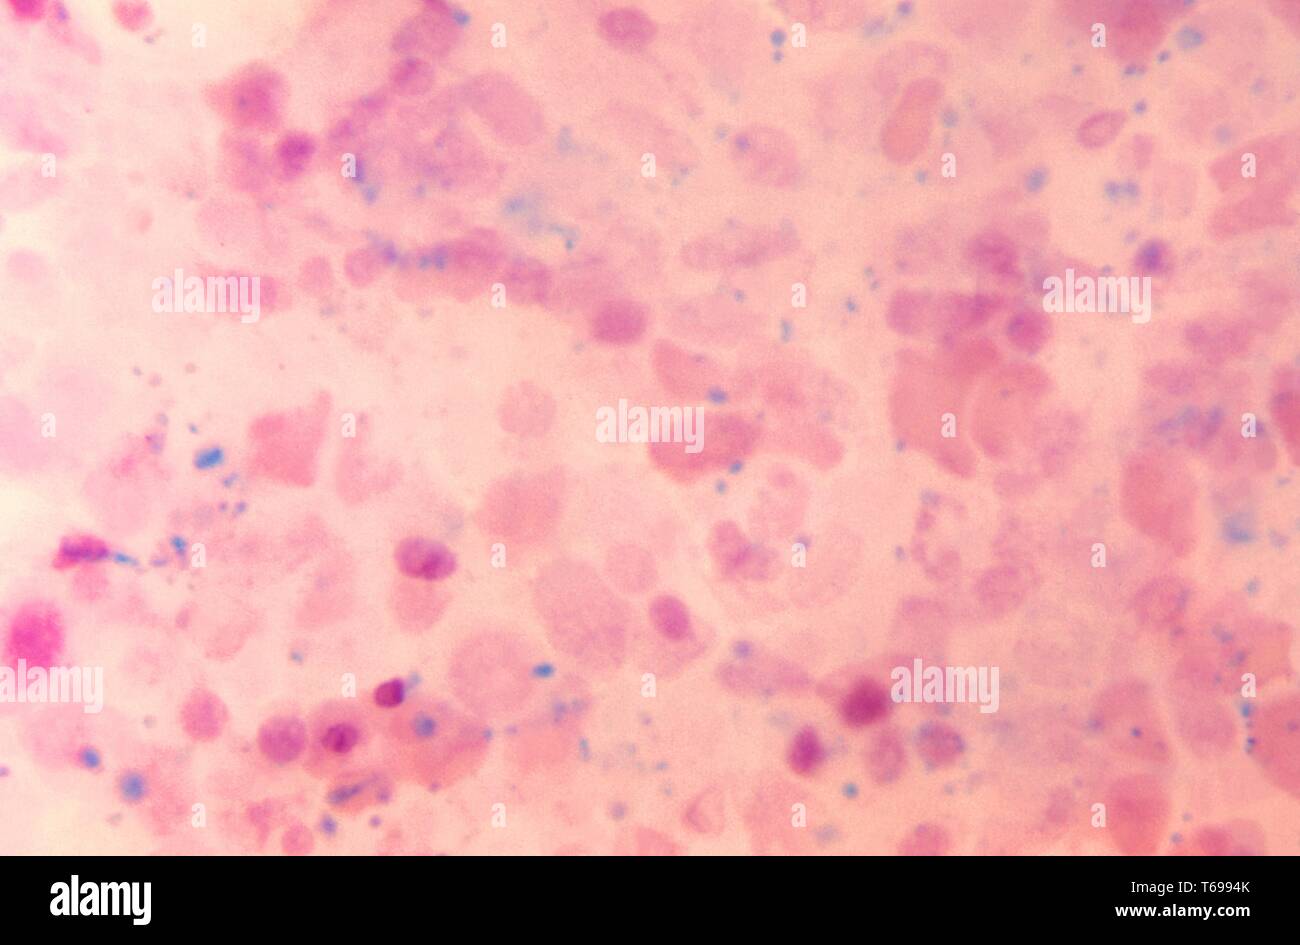 A photomicrograph detecting the presence of hemosiderin, stained blue, within diffuse bone marrow, 1972. Hemosiderin, revealed here using PAS stain and HandE counterstain, is a normal by-product produced during the breakdown of red blood cells, and the decomposition of the hemoglobin molecule contained in these blood components. Image courtesy CDC/Dr. Gordon D. McLaren. Stock Photo